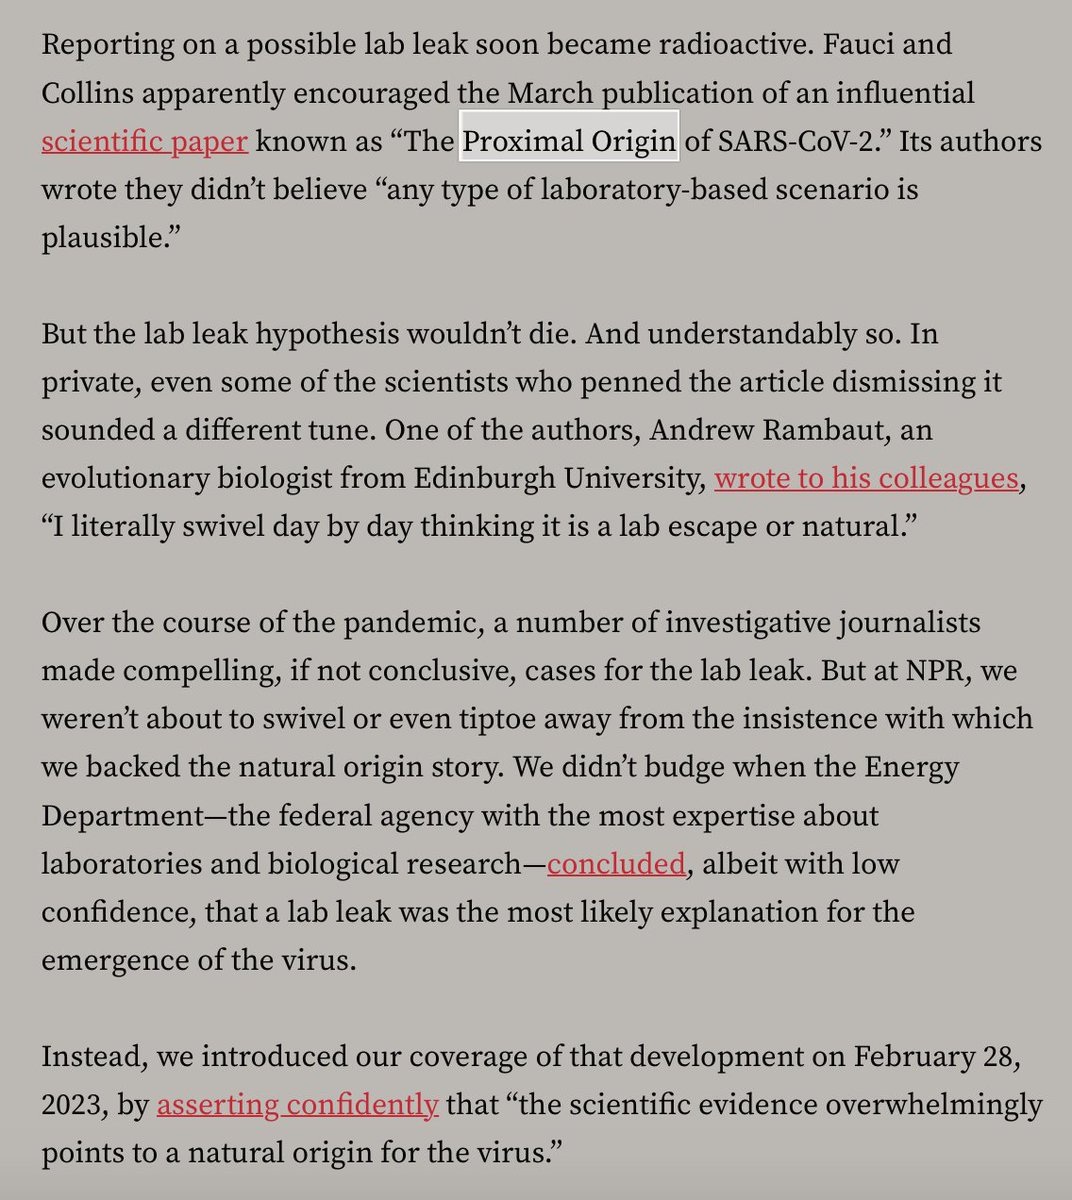 Interesting to see newsrooms being duped by the 'Proximal Origin' paper on COVID origins highlighted here as a major failure in media. Obviously I agree! But the story is deeper than that. Newsrooms are failing to course correct and make amends. But on top of that, some are